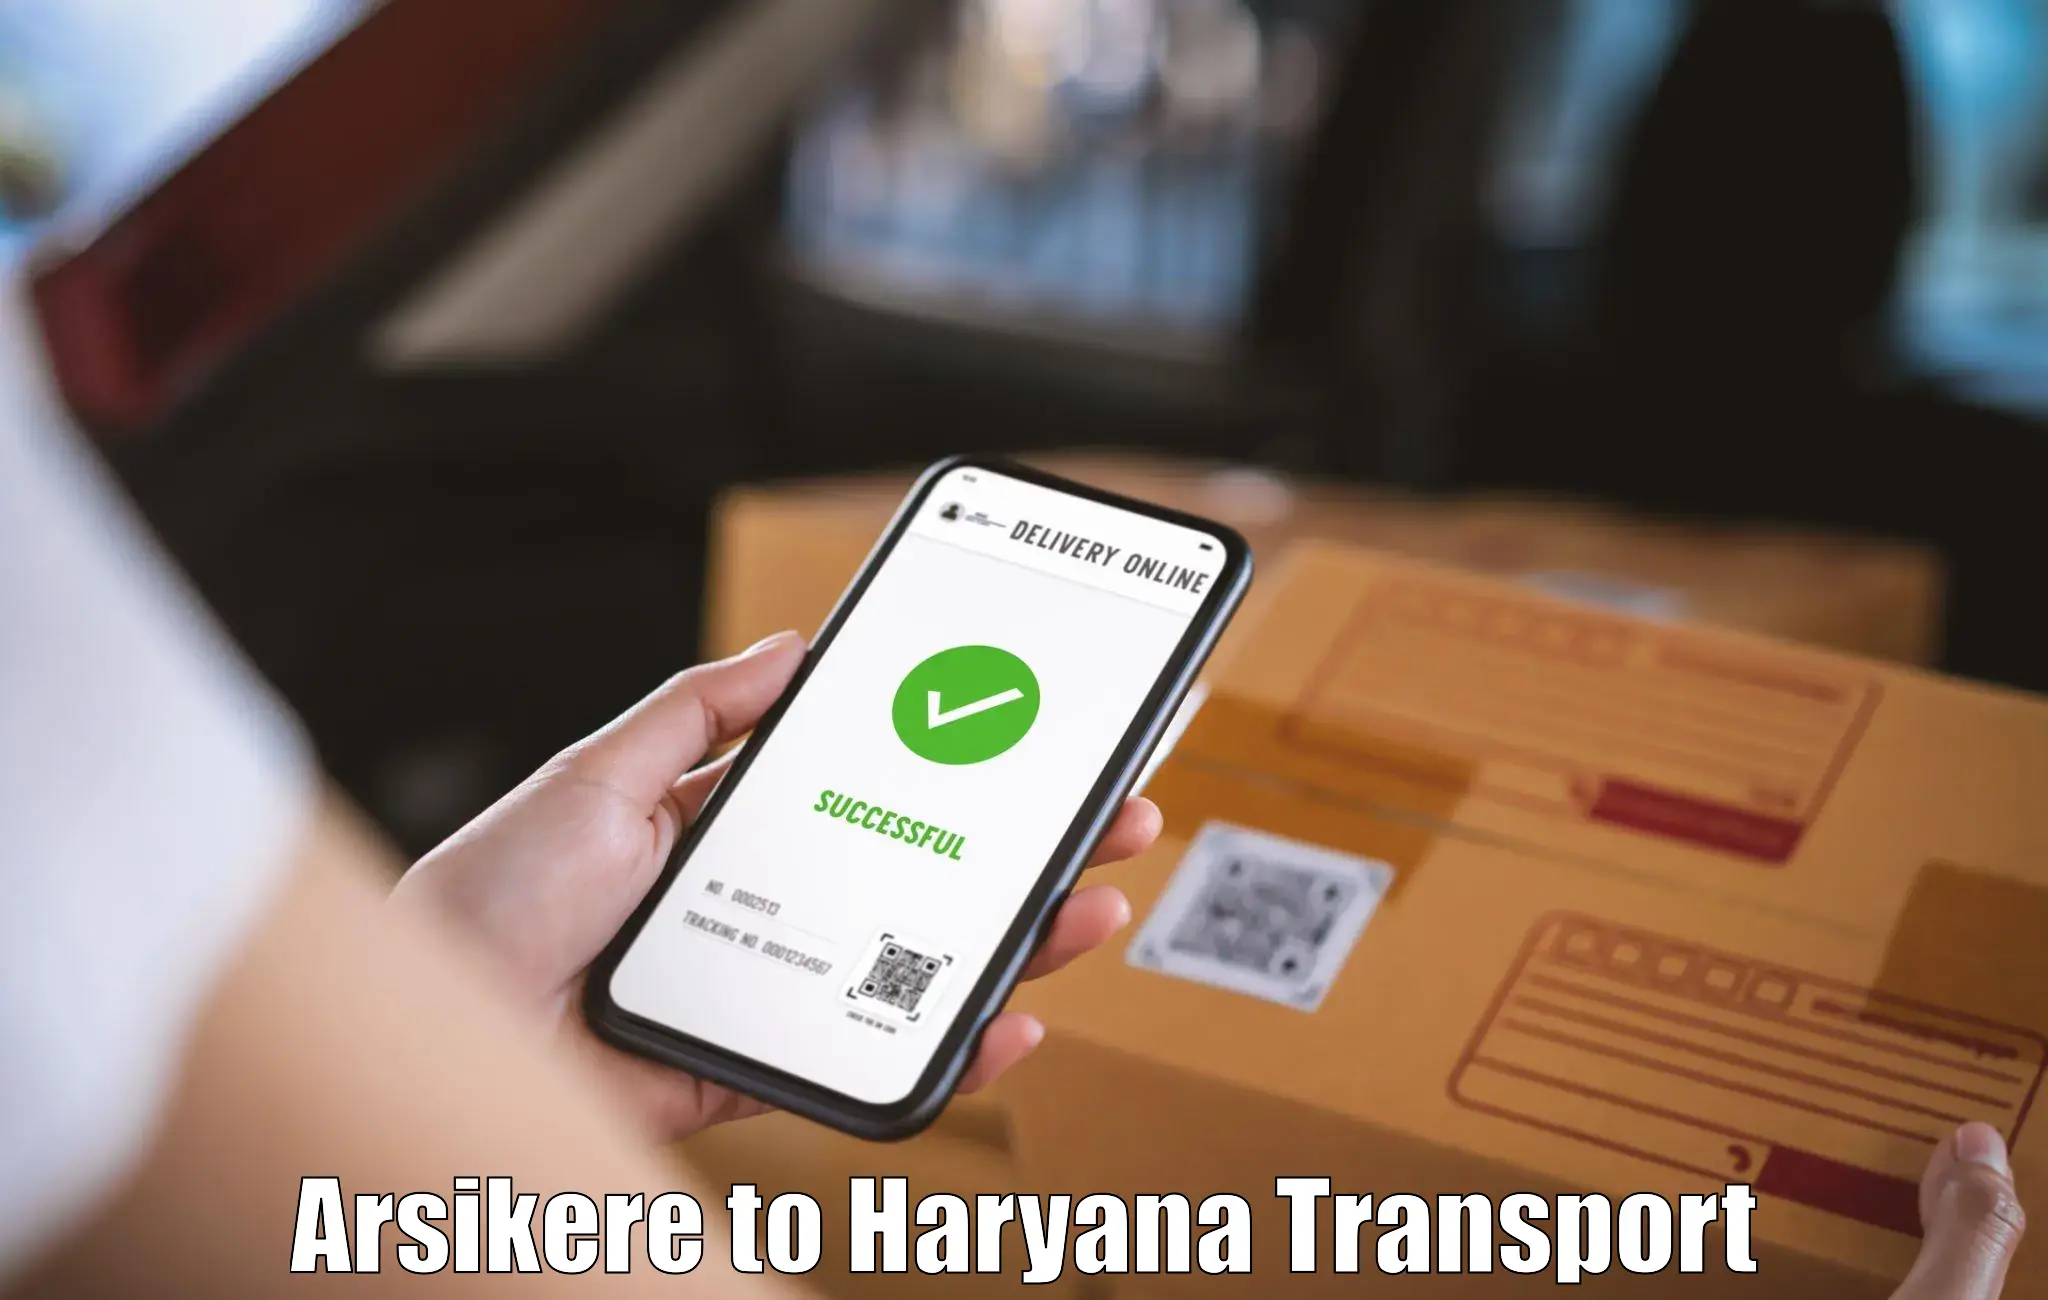 Container transport service Arsikere to Haryana